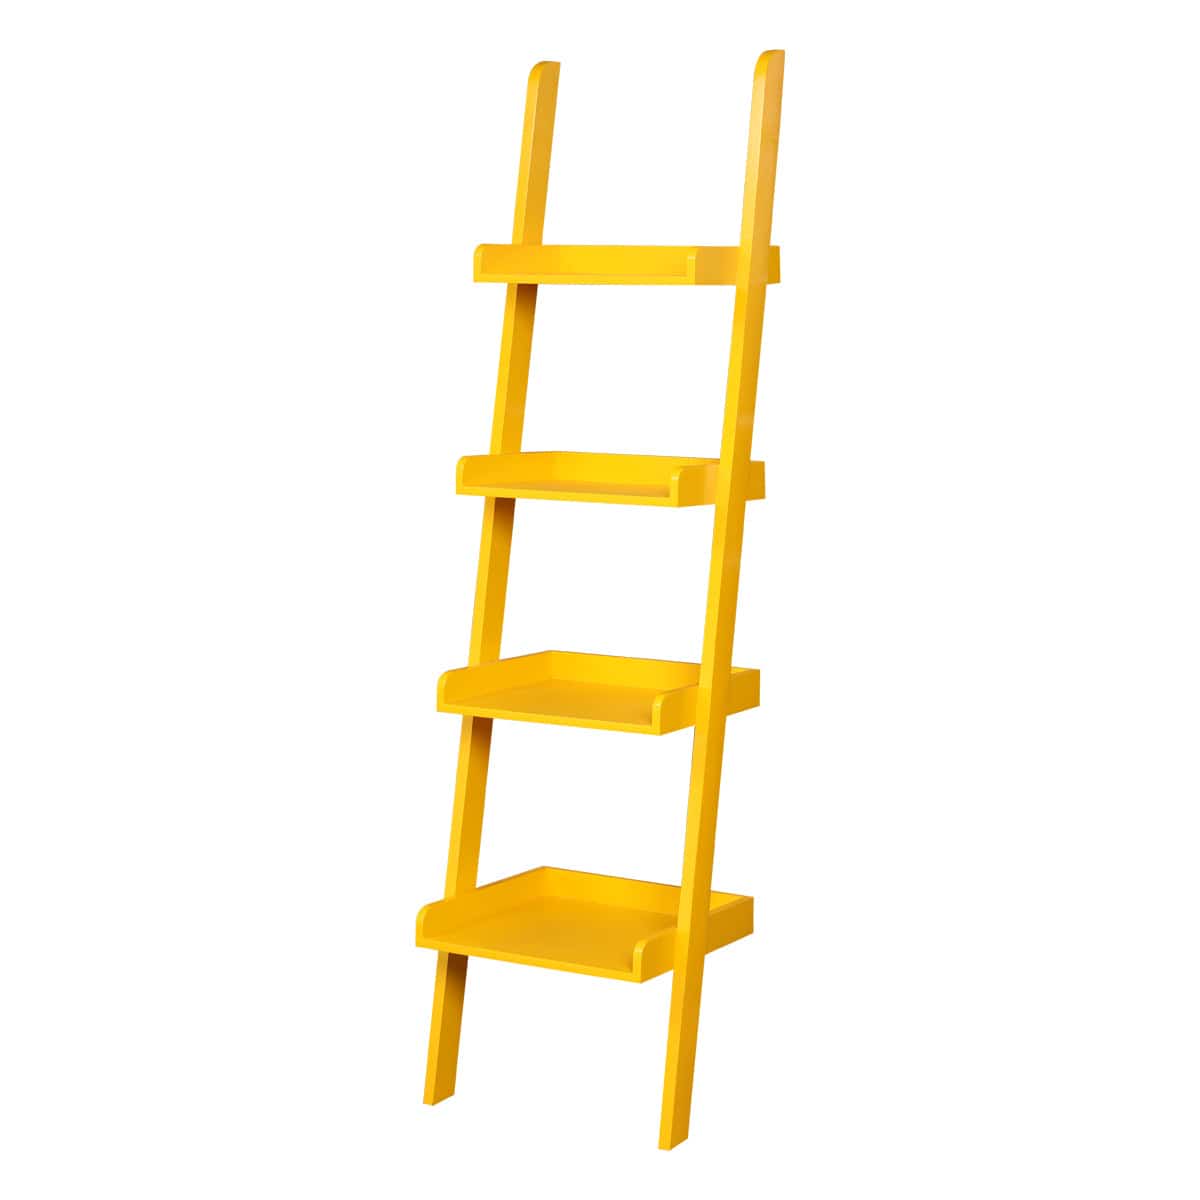 Ladder Rack 4 tiered - Yellow